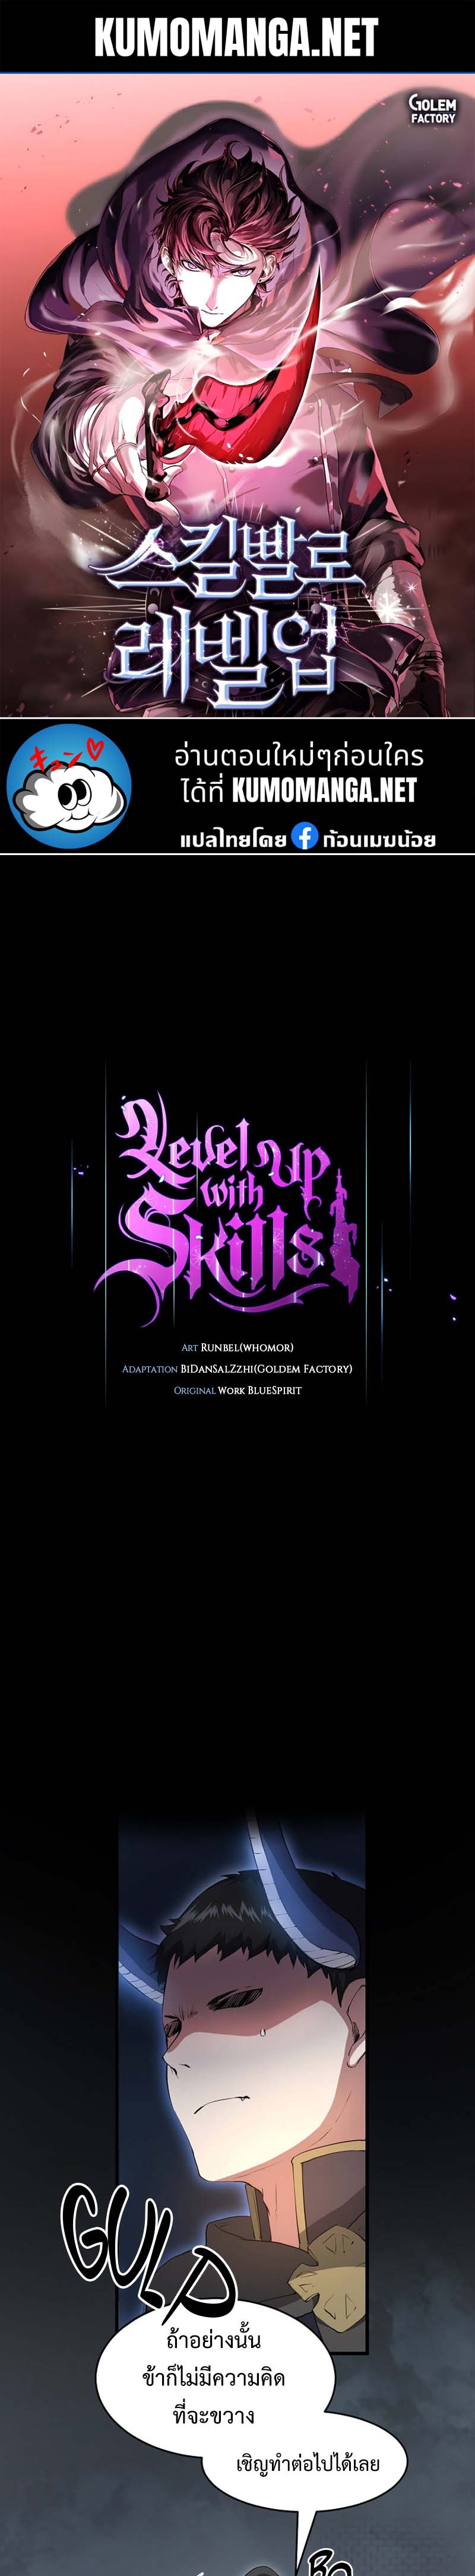 Level Up with Skills 55 (1)